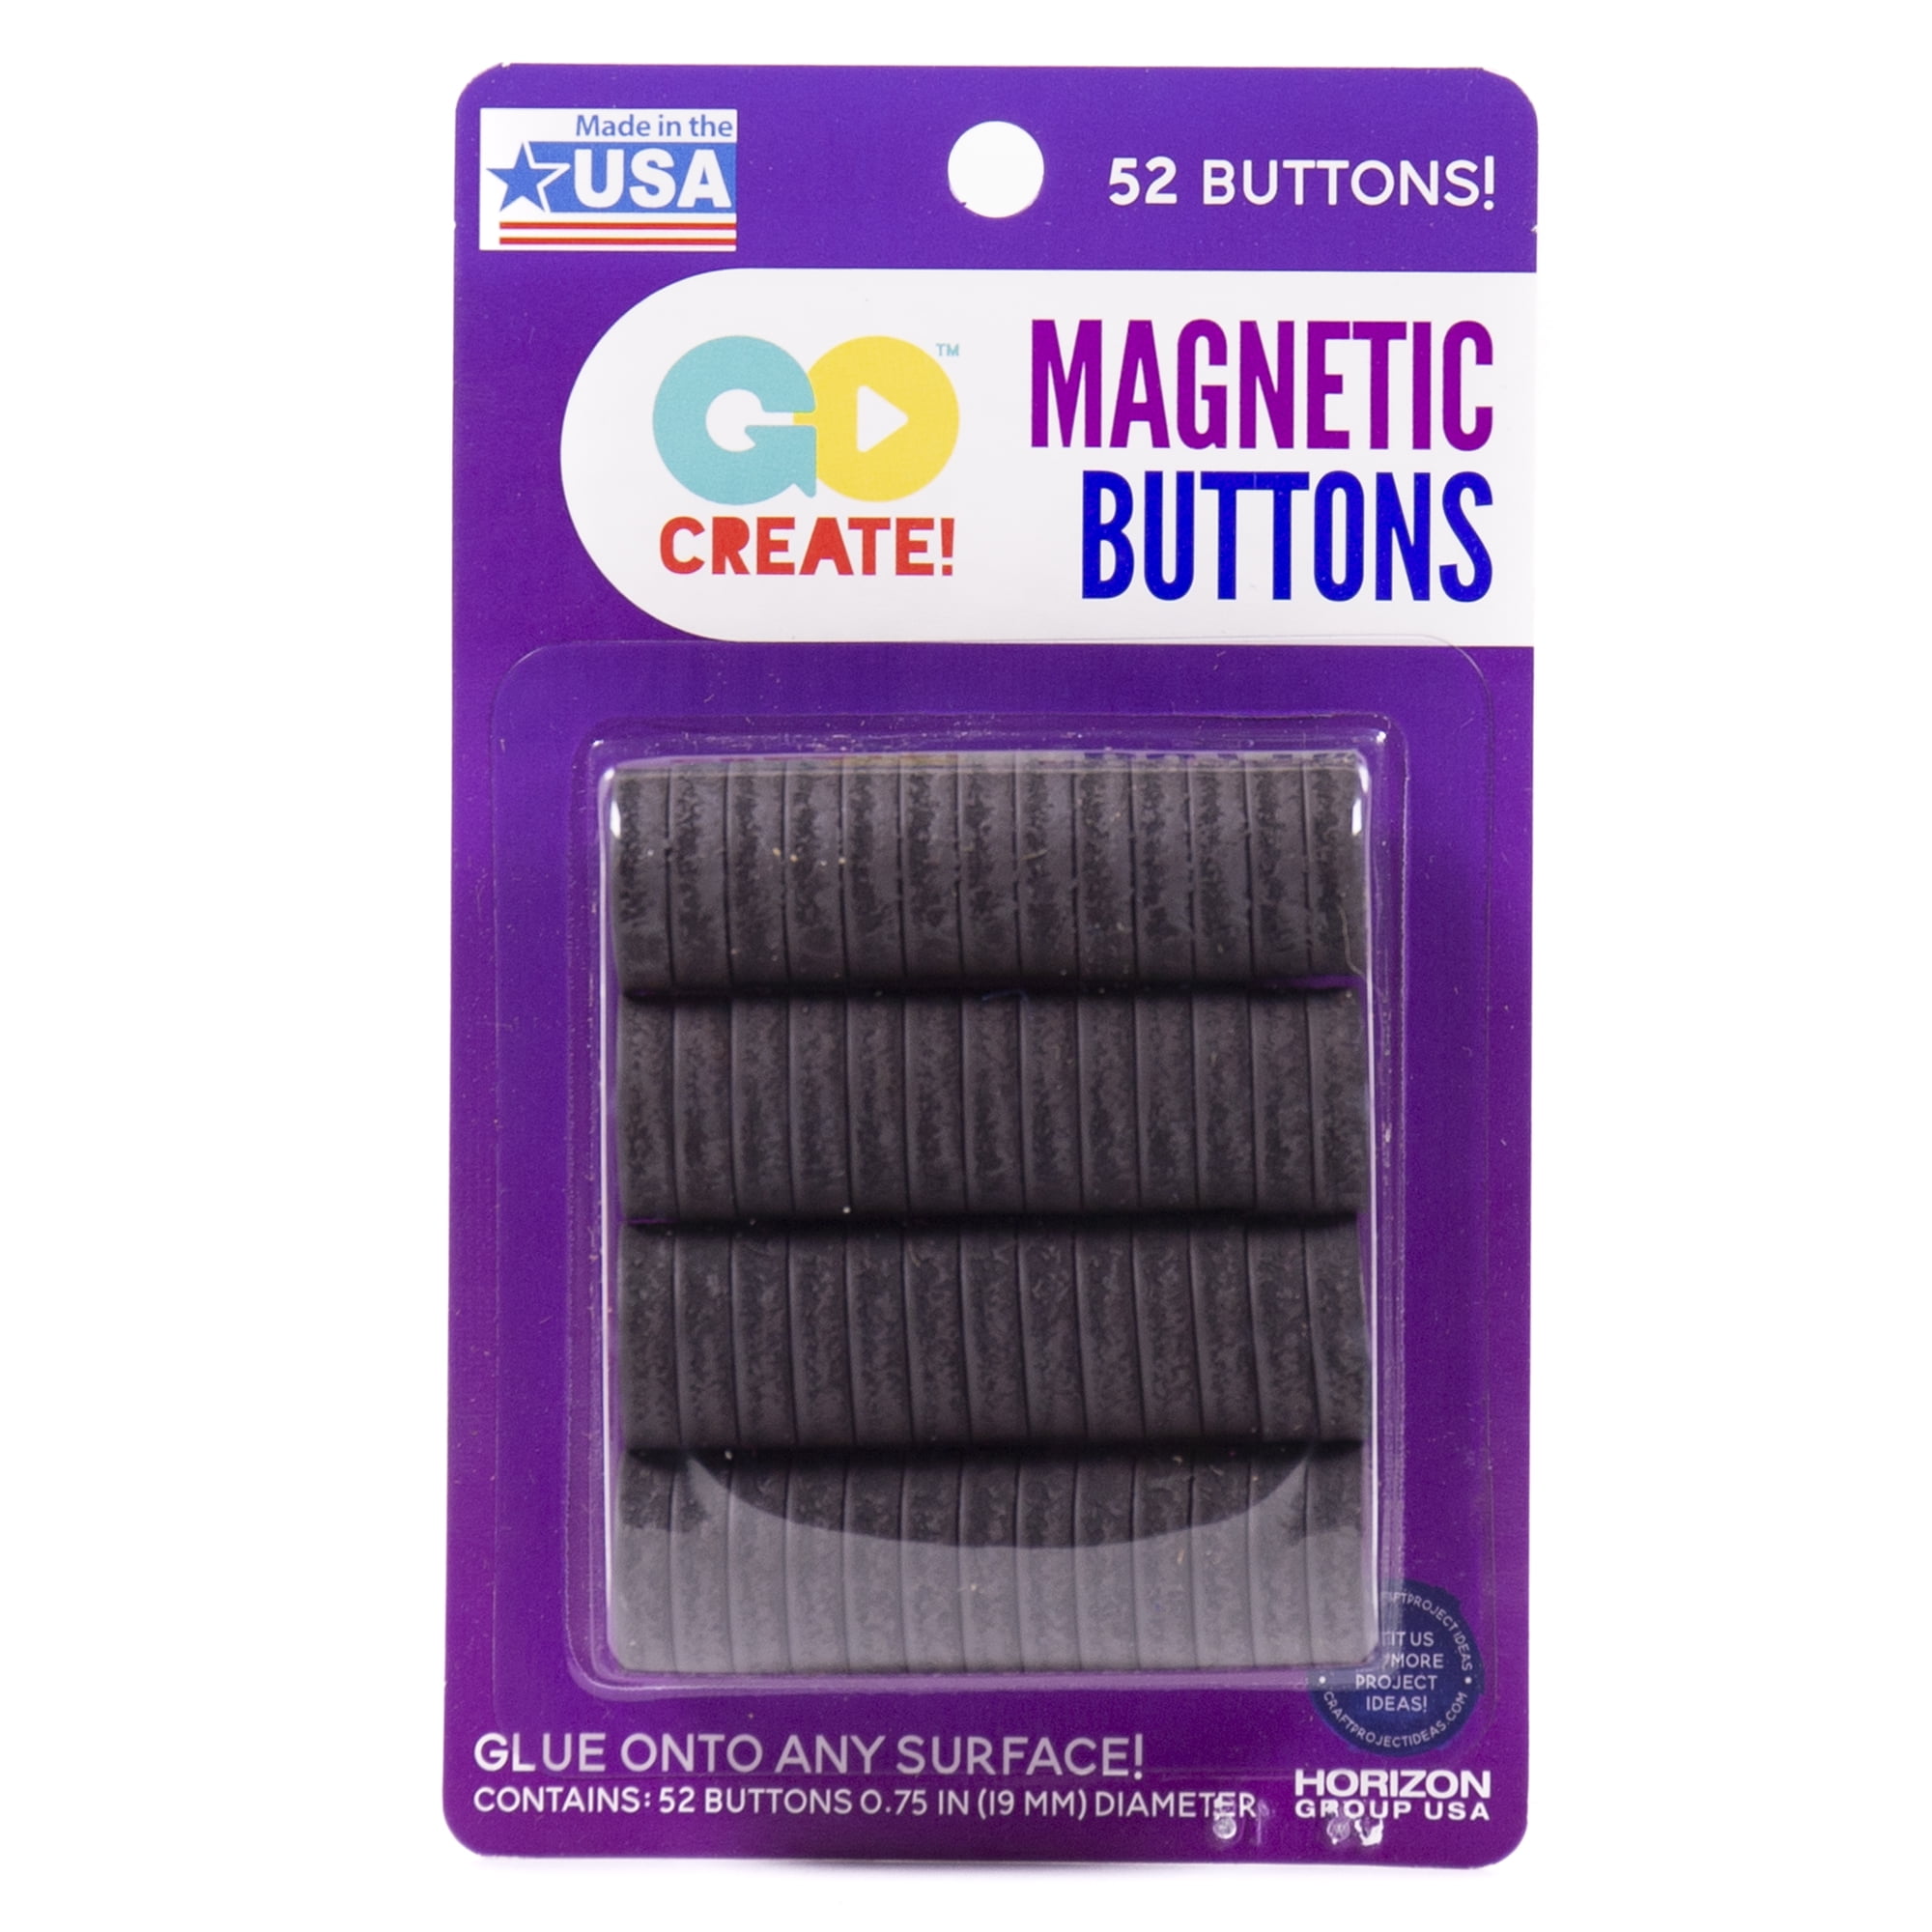 Go Create 19mm Magnets, 52 Count